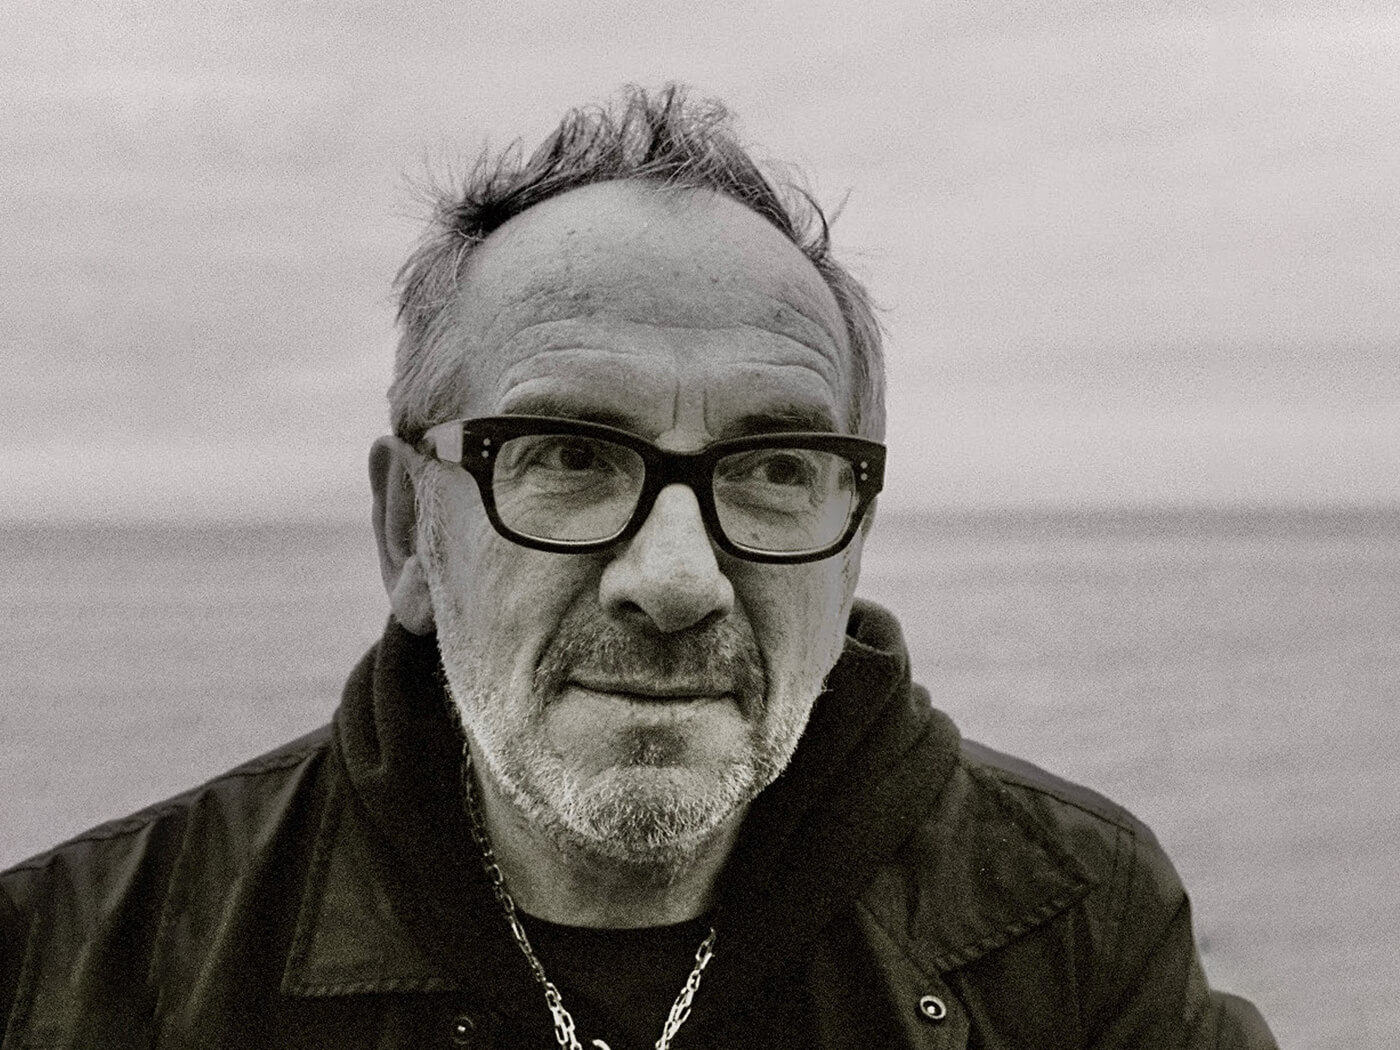 Elvis Costello announces new album The Boy Named If; shares track